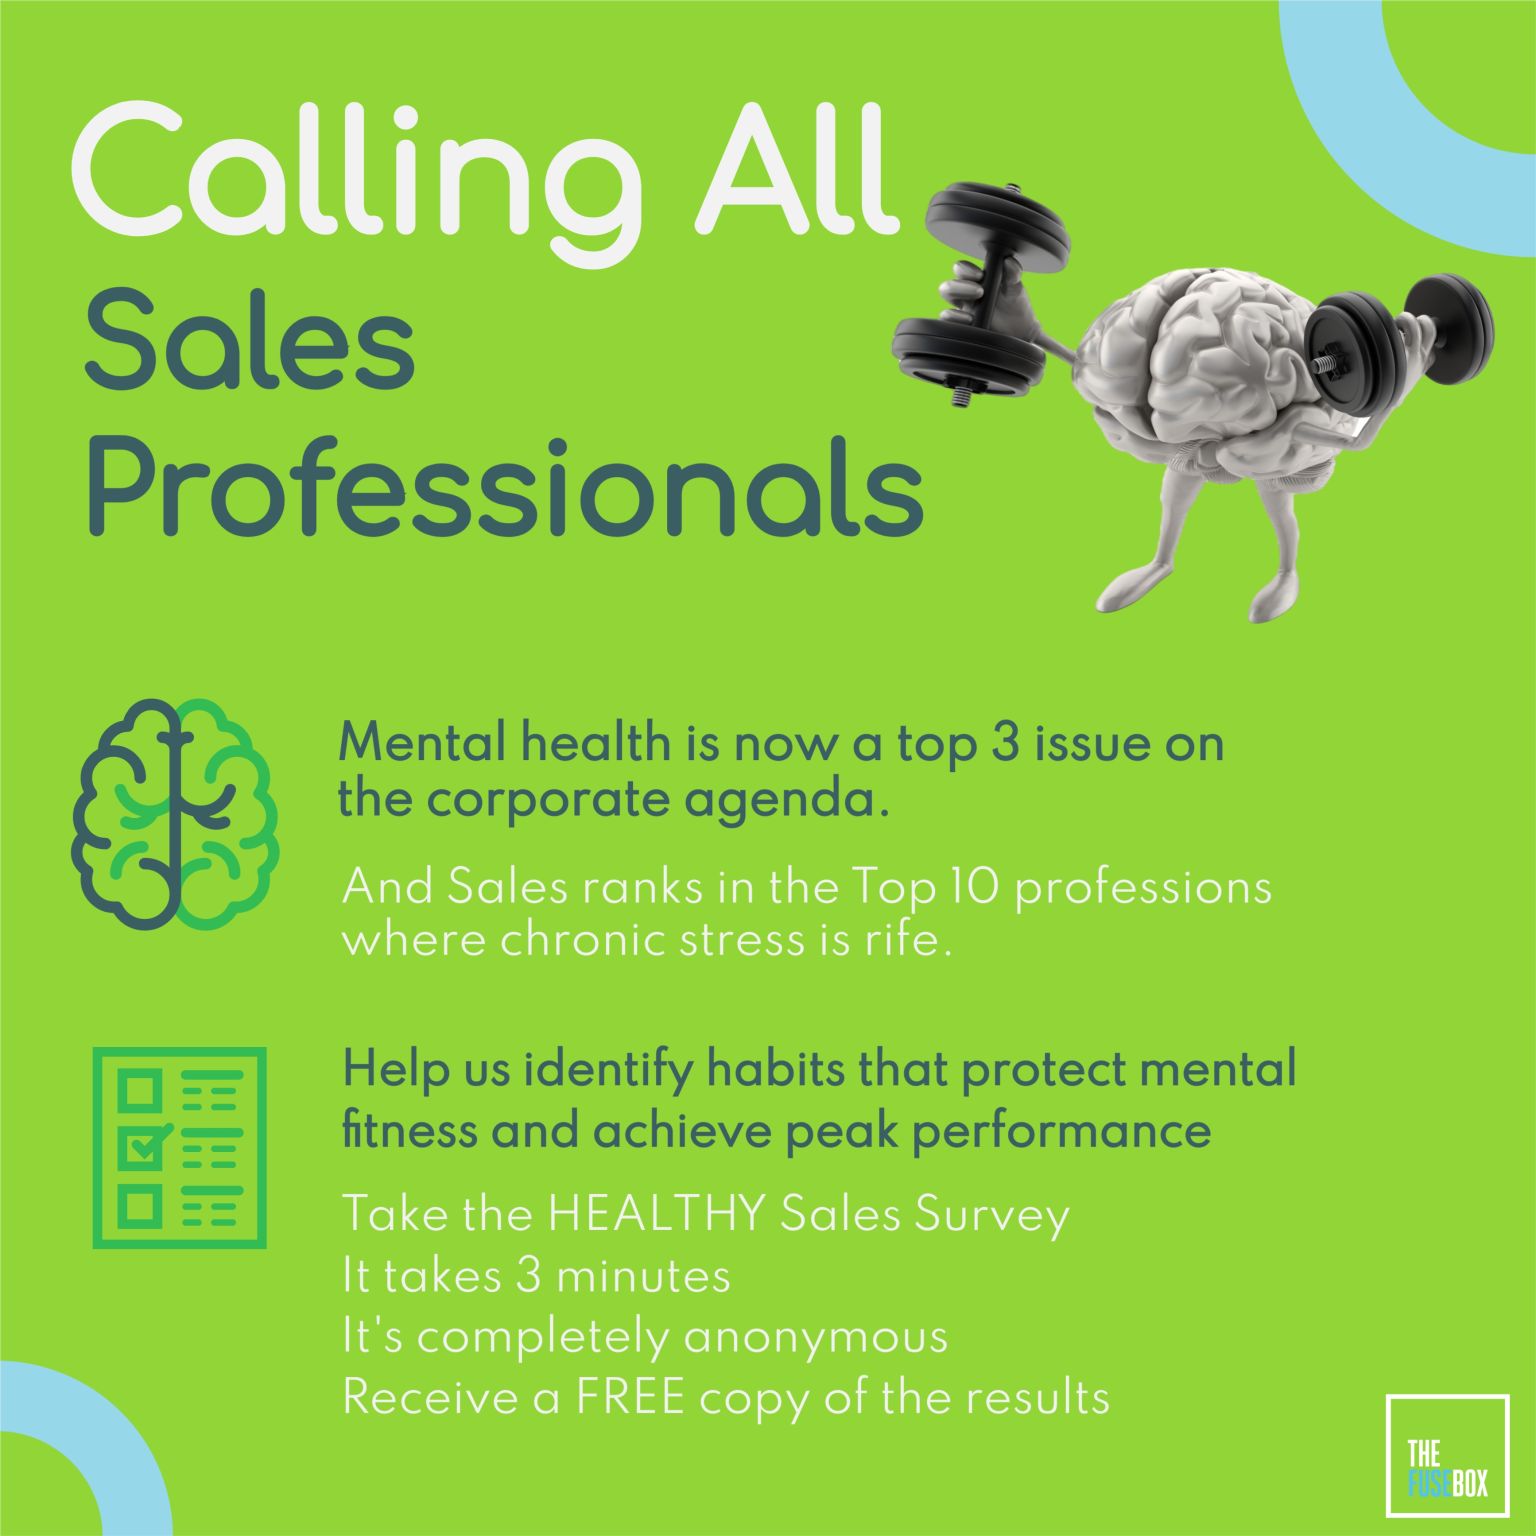 Protecting mental health for Sales Professionals